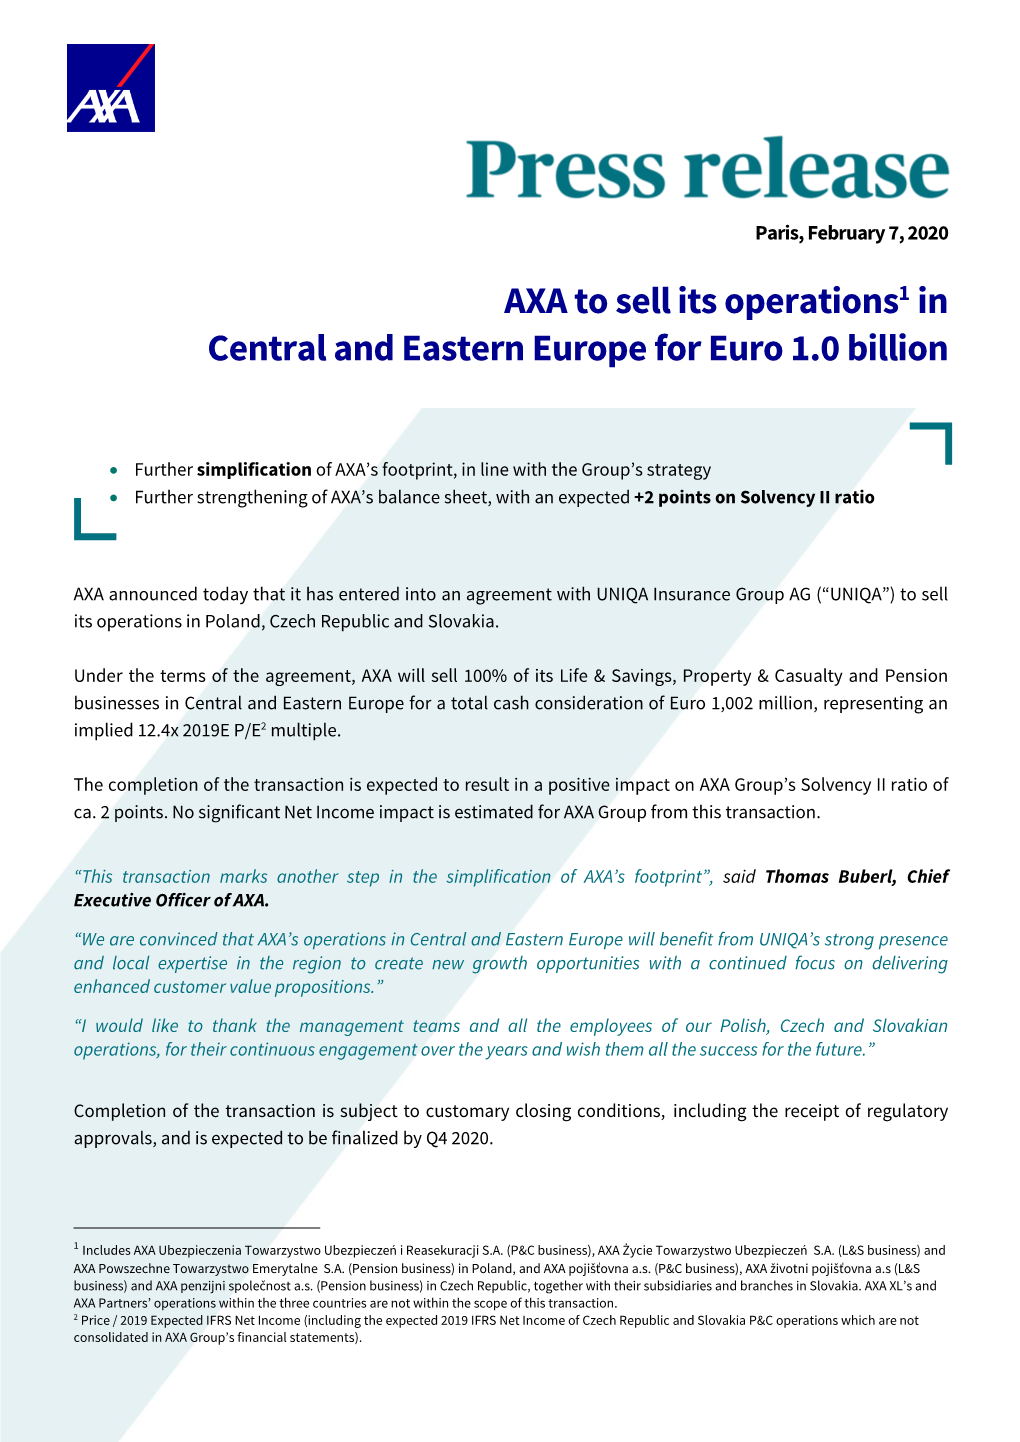 AXA to Sell Its Operations in Central And